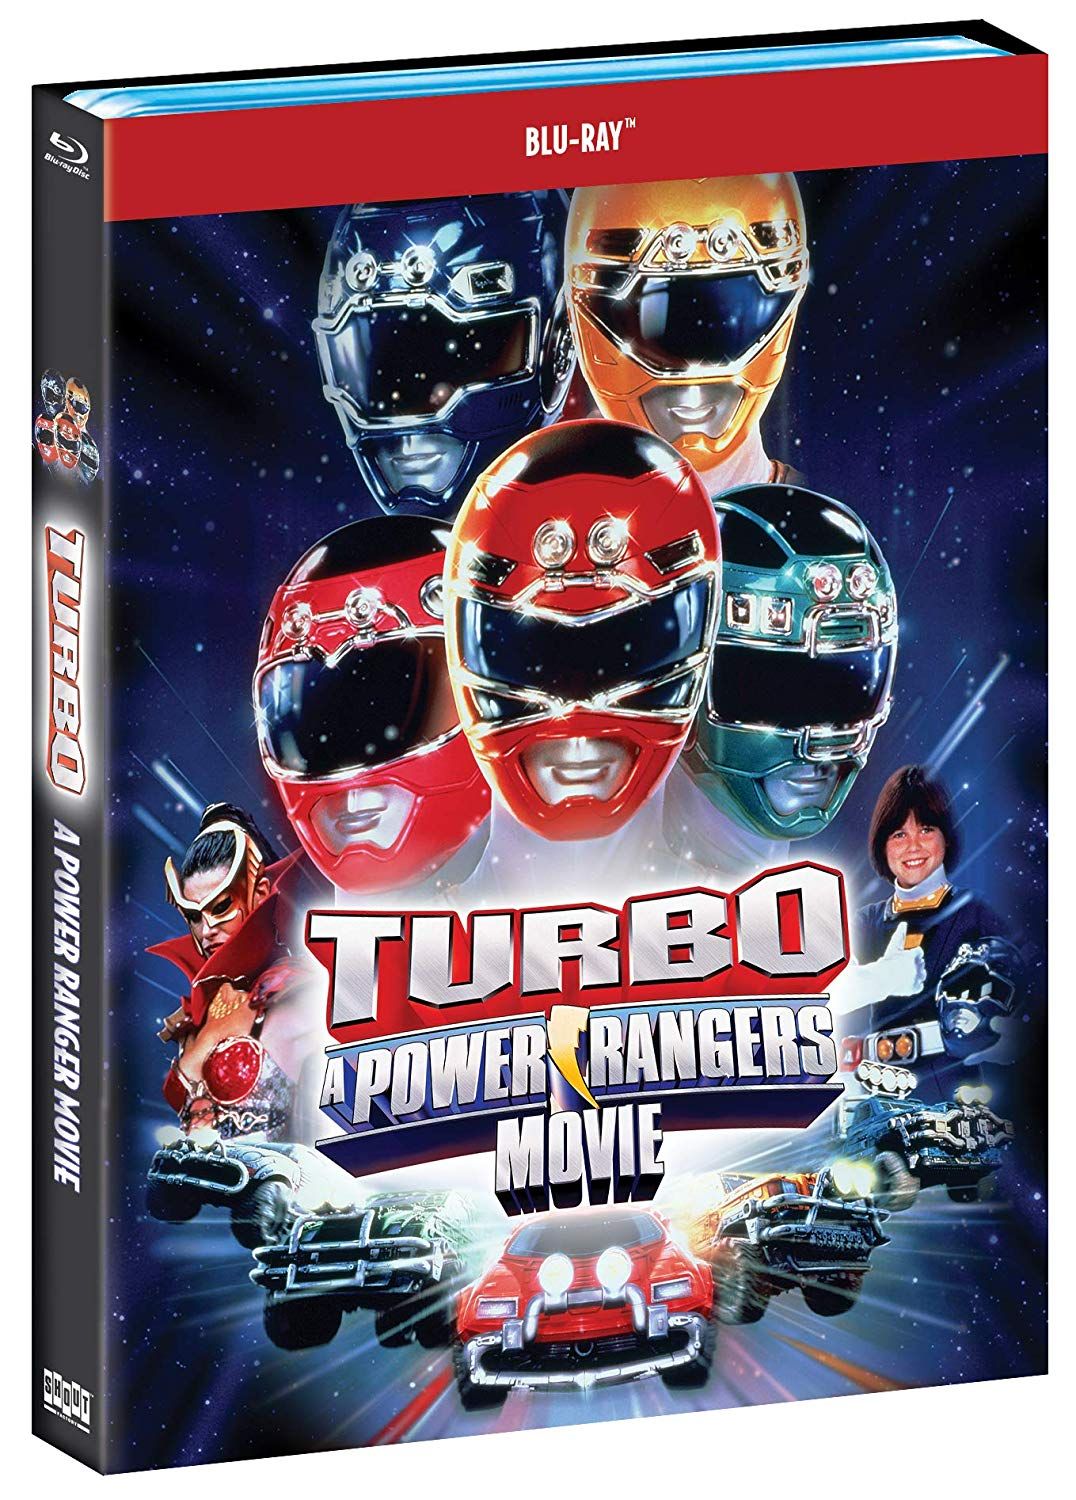 Turbo: A Power Rangers Movie blu-ray cover